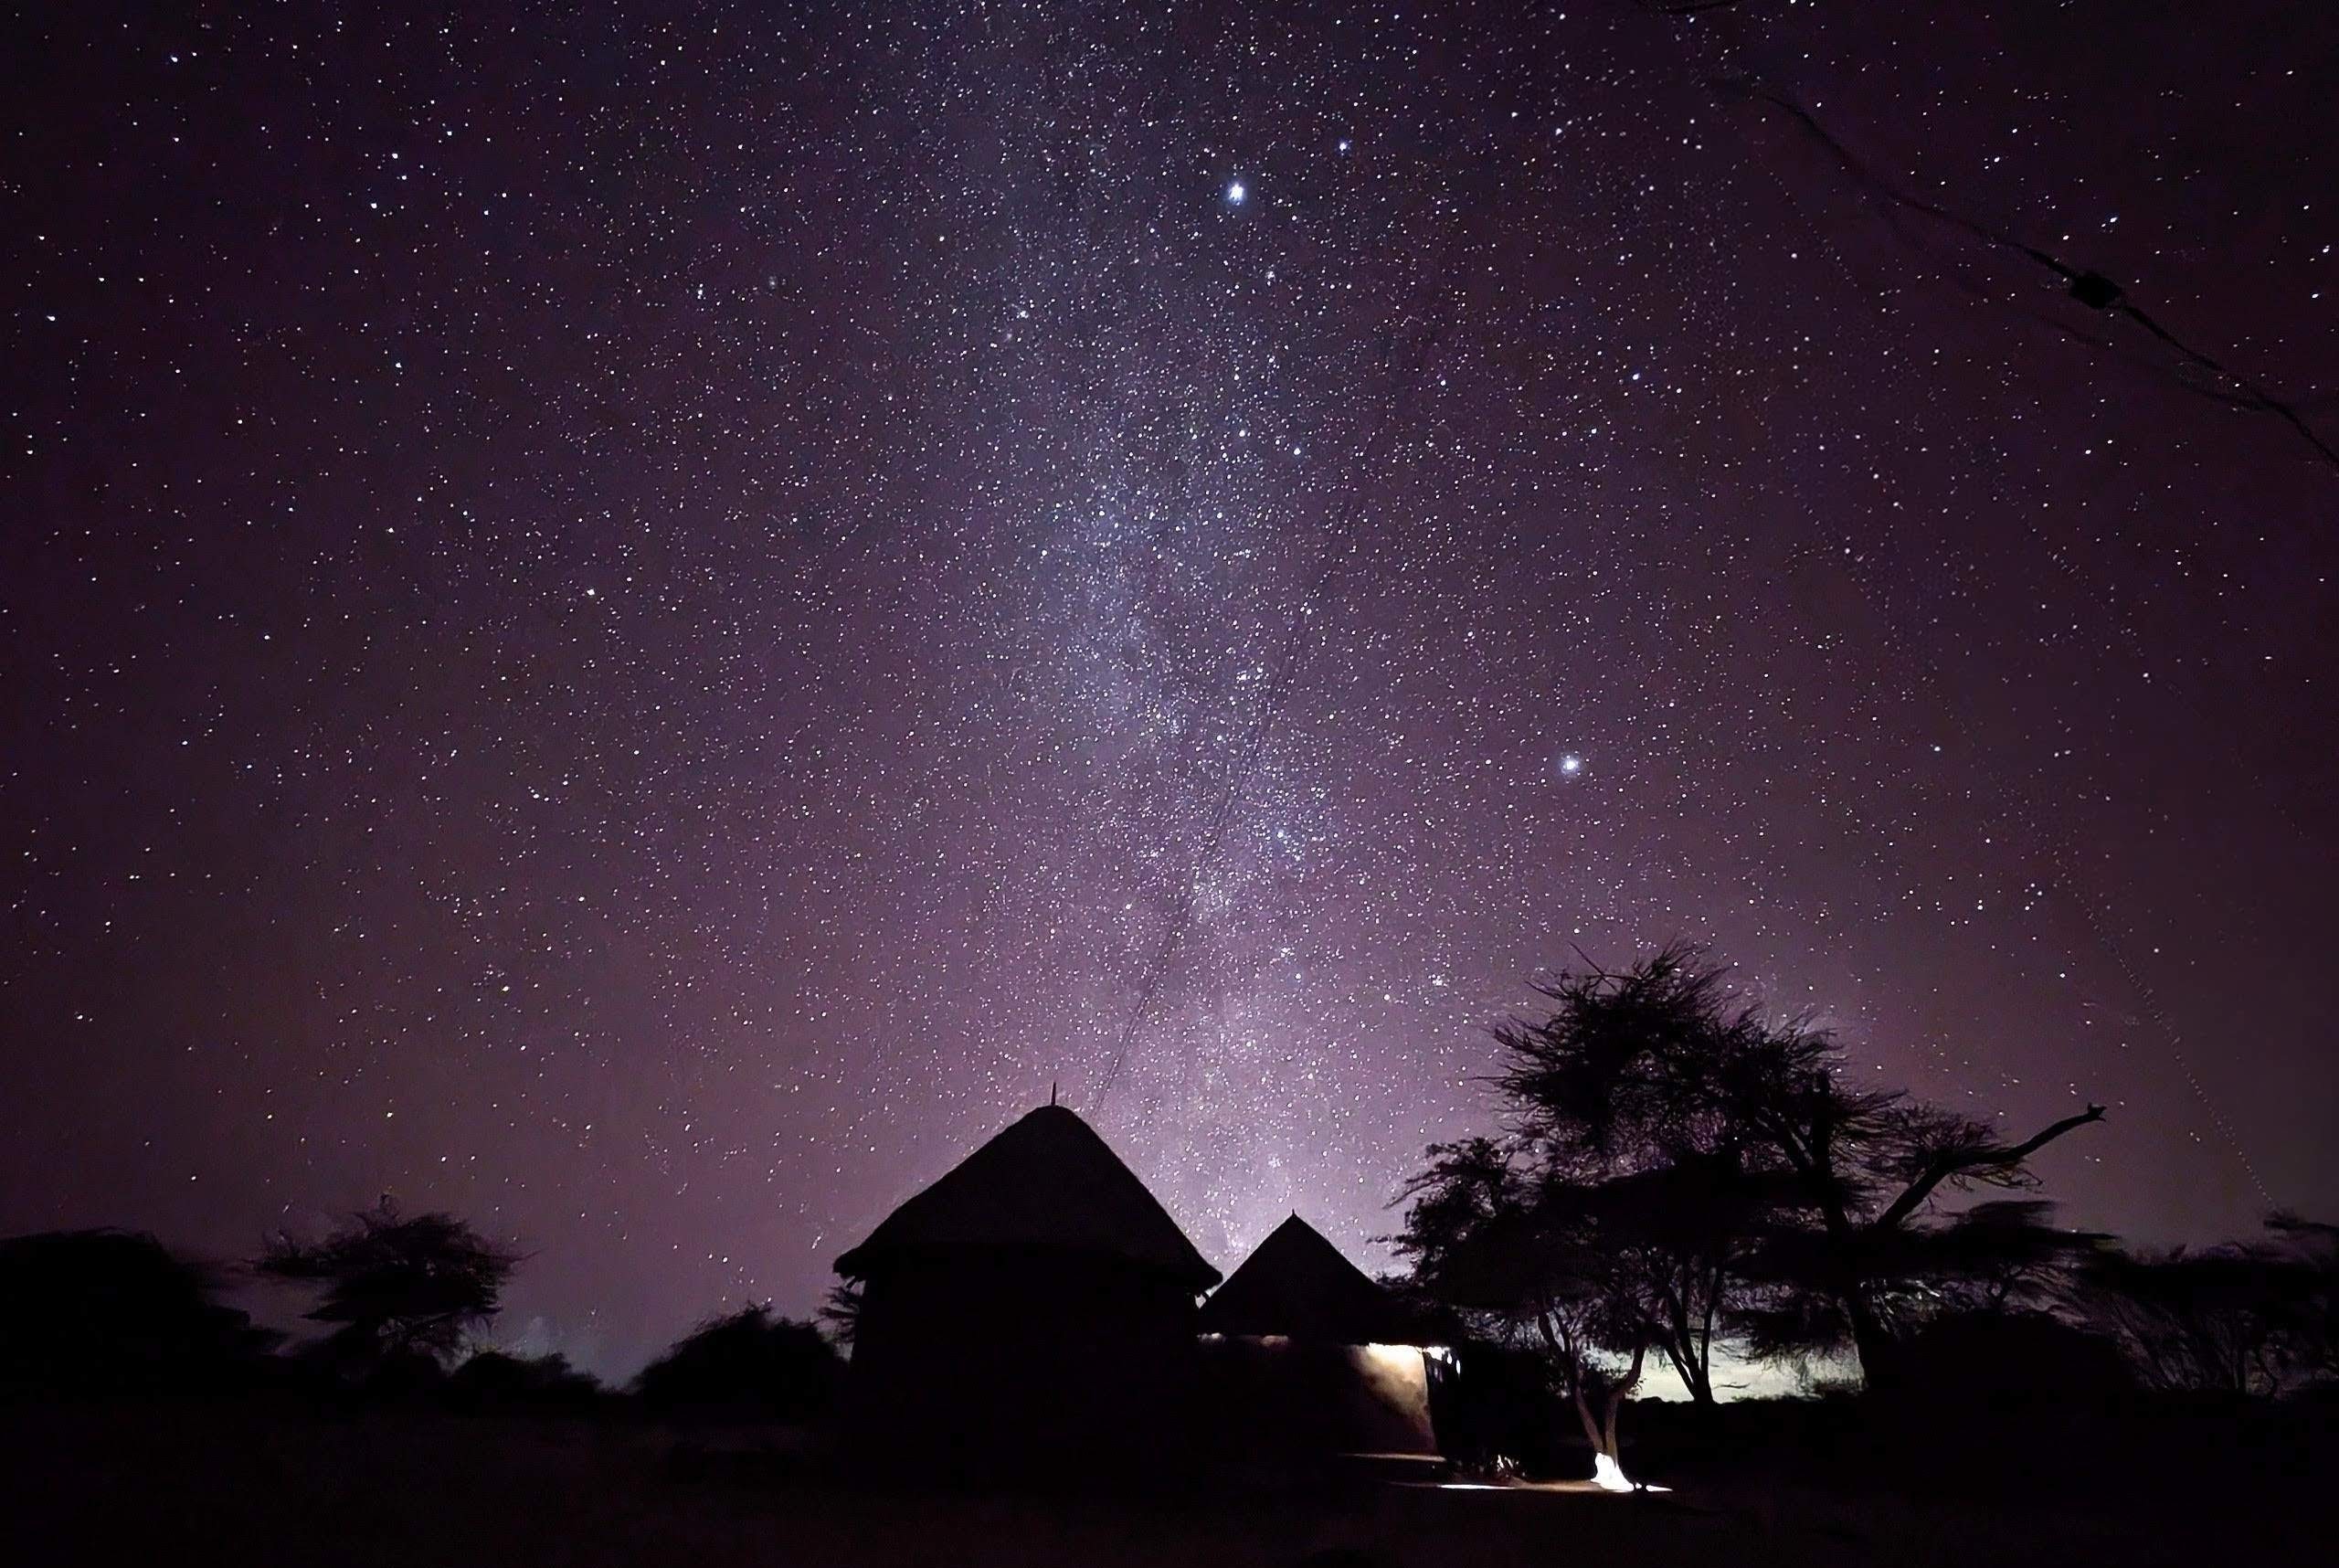 A photograph of the darkened sillouettes of trees and huts against the purple night sky, where the milky way is visible across the center of the photo.